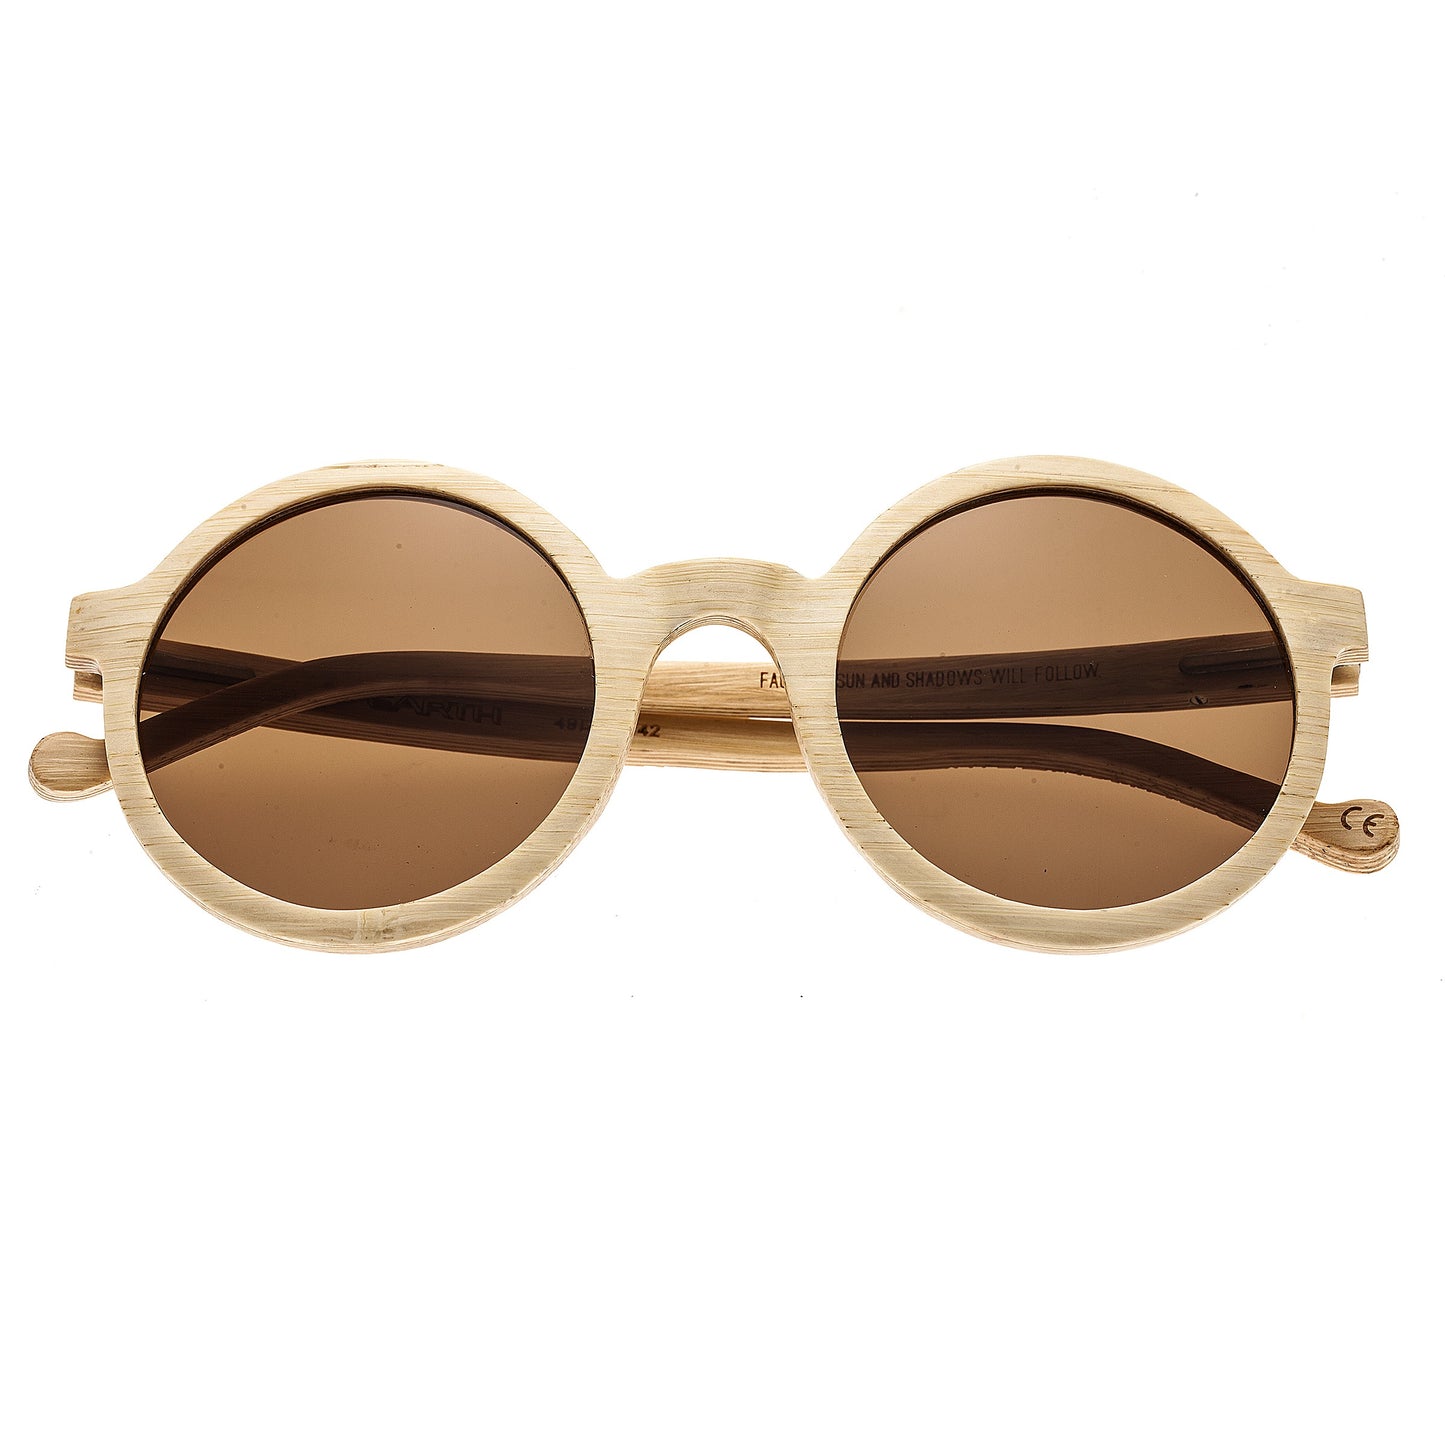 Home / GROWN® Sustainable Bamboo & Wood sunglasses